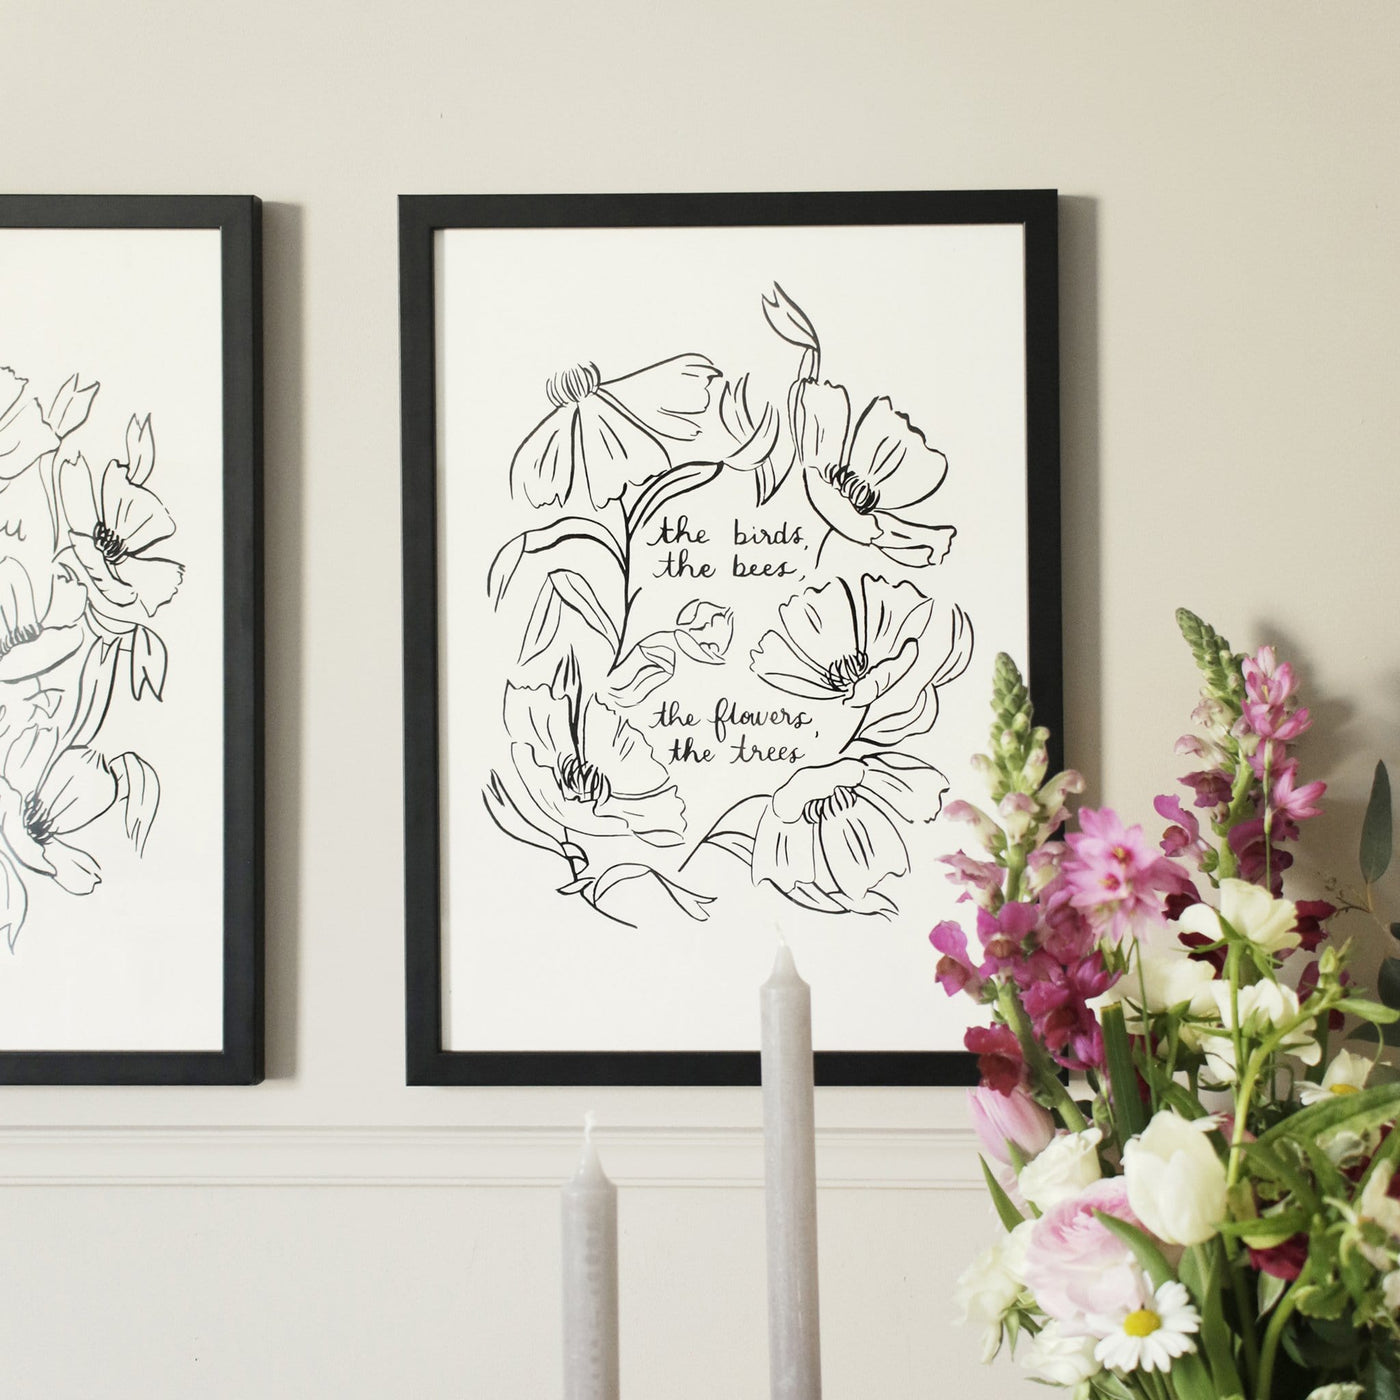 Black Floral Line Art Work Print With The Words The Birds The Bees The Flowers The Trees In A Black Frame Hung On A Wall - Annie Dornan Smith